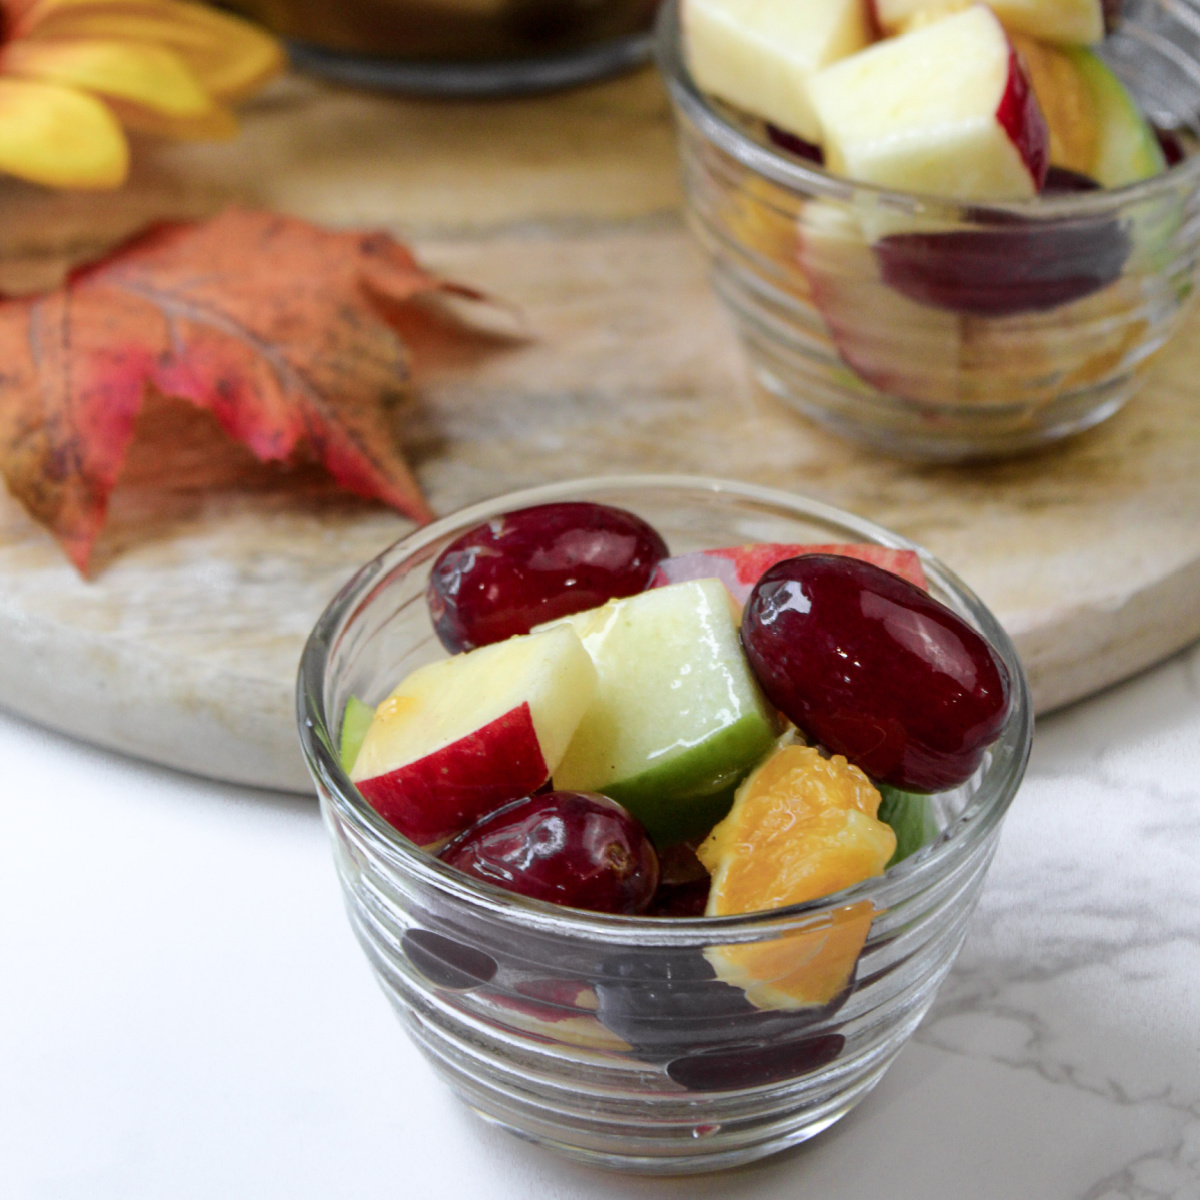 fall fruit salad with grapes and apples.